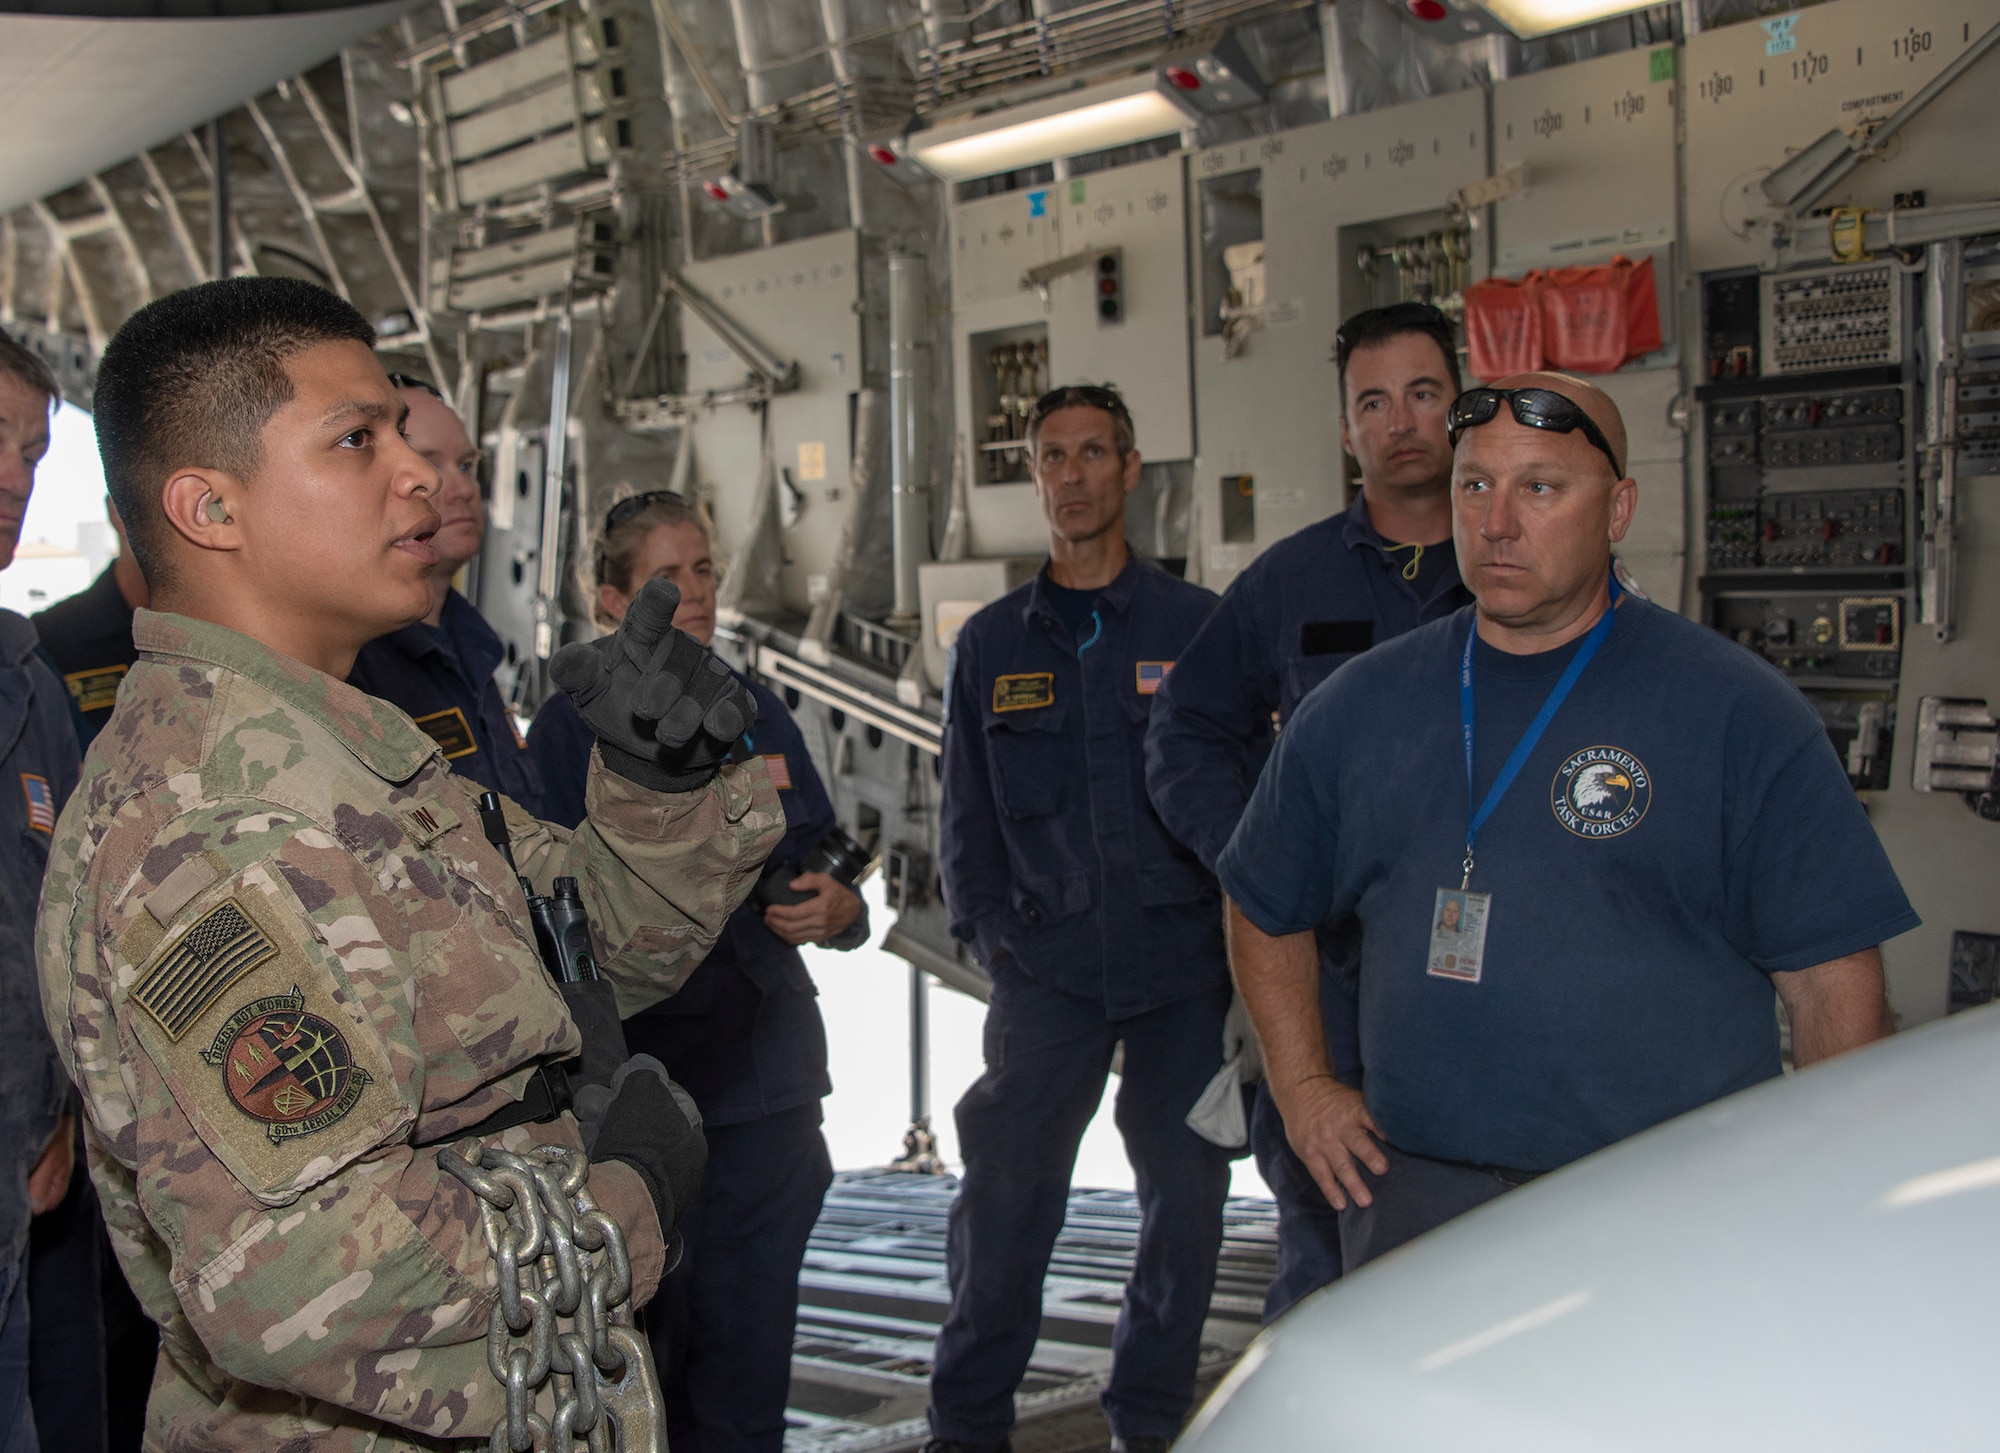 .S. Air Force Senior Airman Edward Colvin, left, a 60th Aerial Port Squadron expeditor, discuses cargo loading procedures with California Urban Search and Rescue Task Force 7 June 13, 2019 at Travis Air Force Base, California, during a joint inspection and logistics drill. The annual training helps members of CA TF-7 learn about the process, governing and directives and ensures cargo is safe before loading onto an aircraft.  (U.S. Air Force photo by Heide Couch)